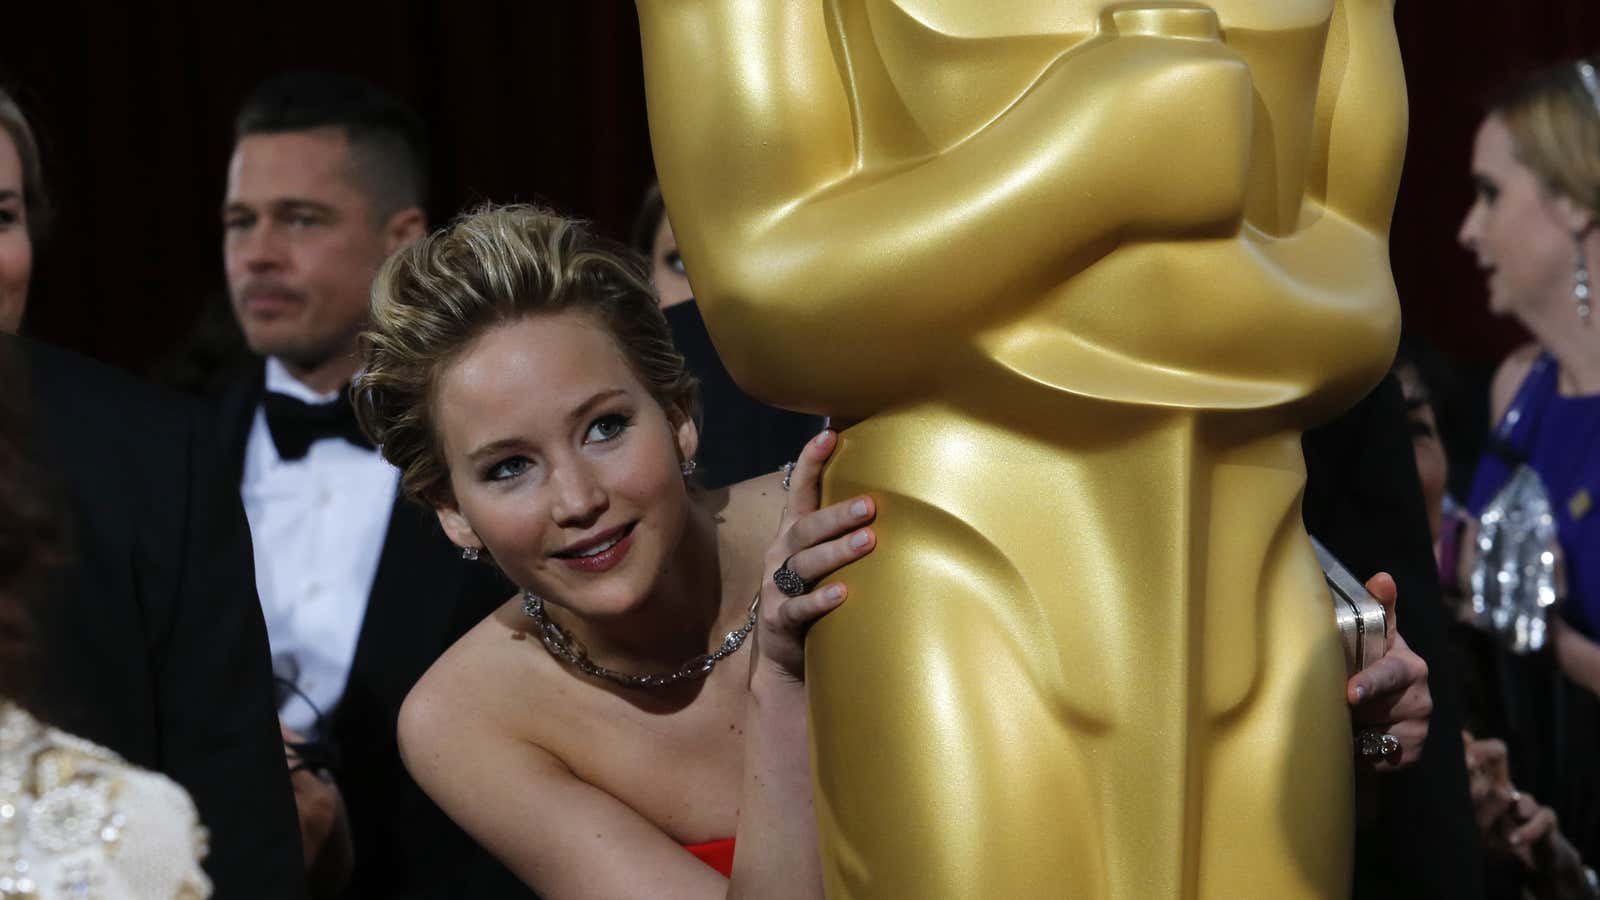 Don’t be shy, Jennifer. Every nominee gets a swag bag.